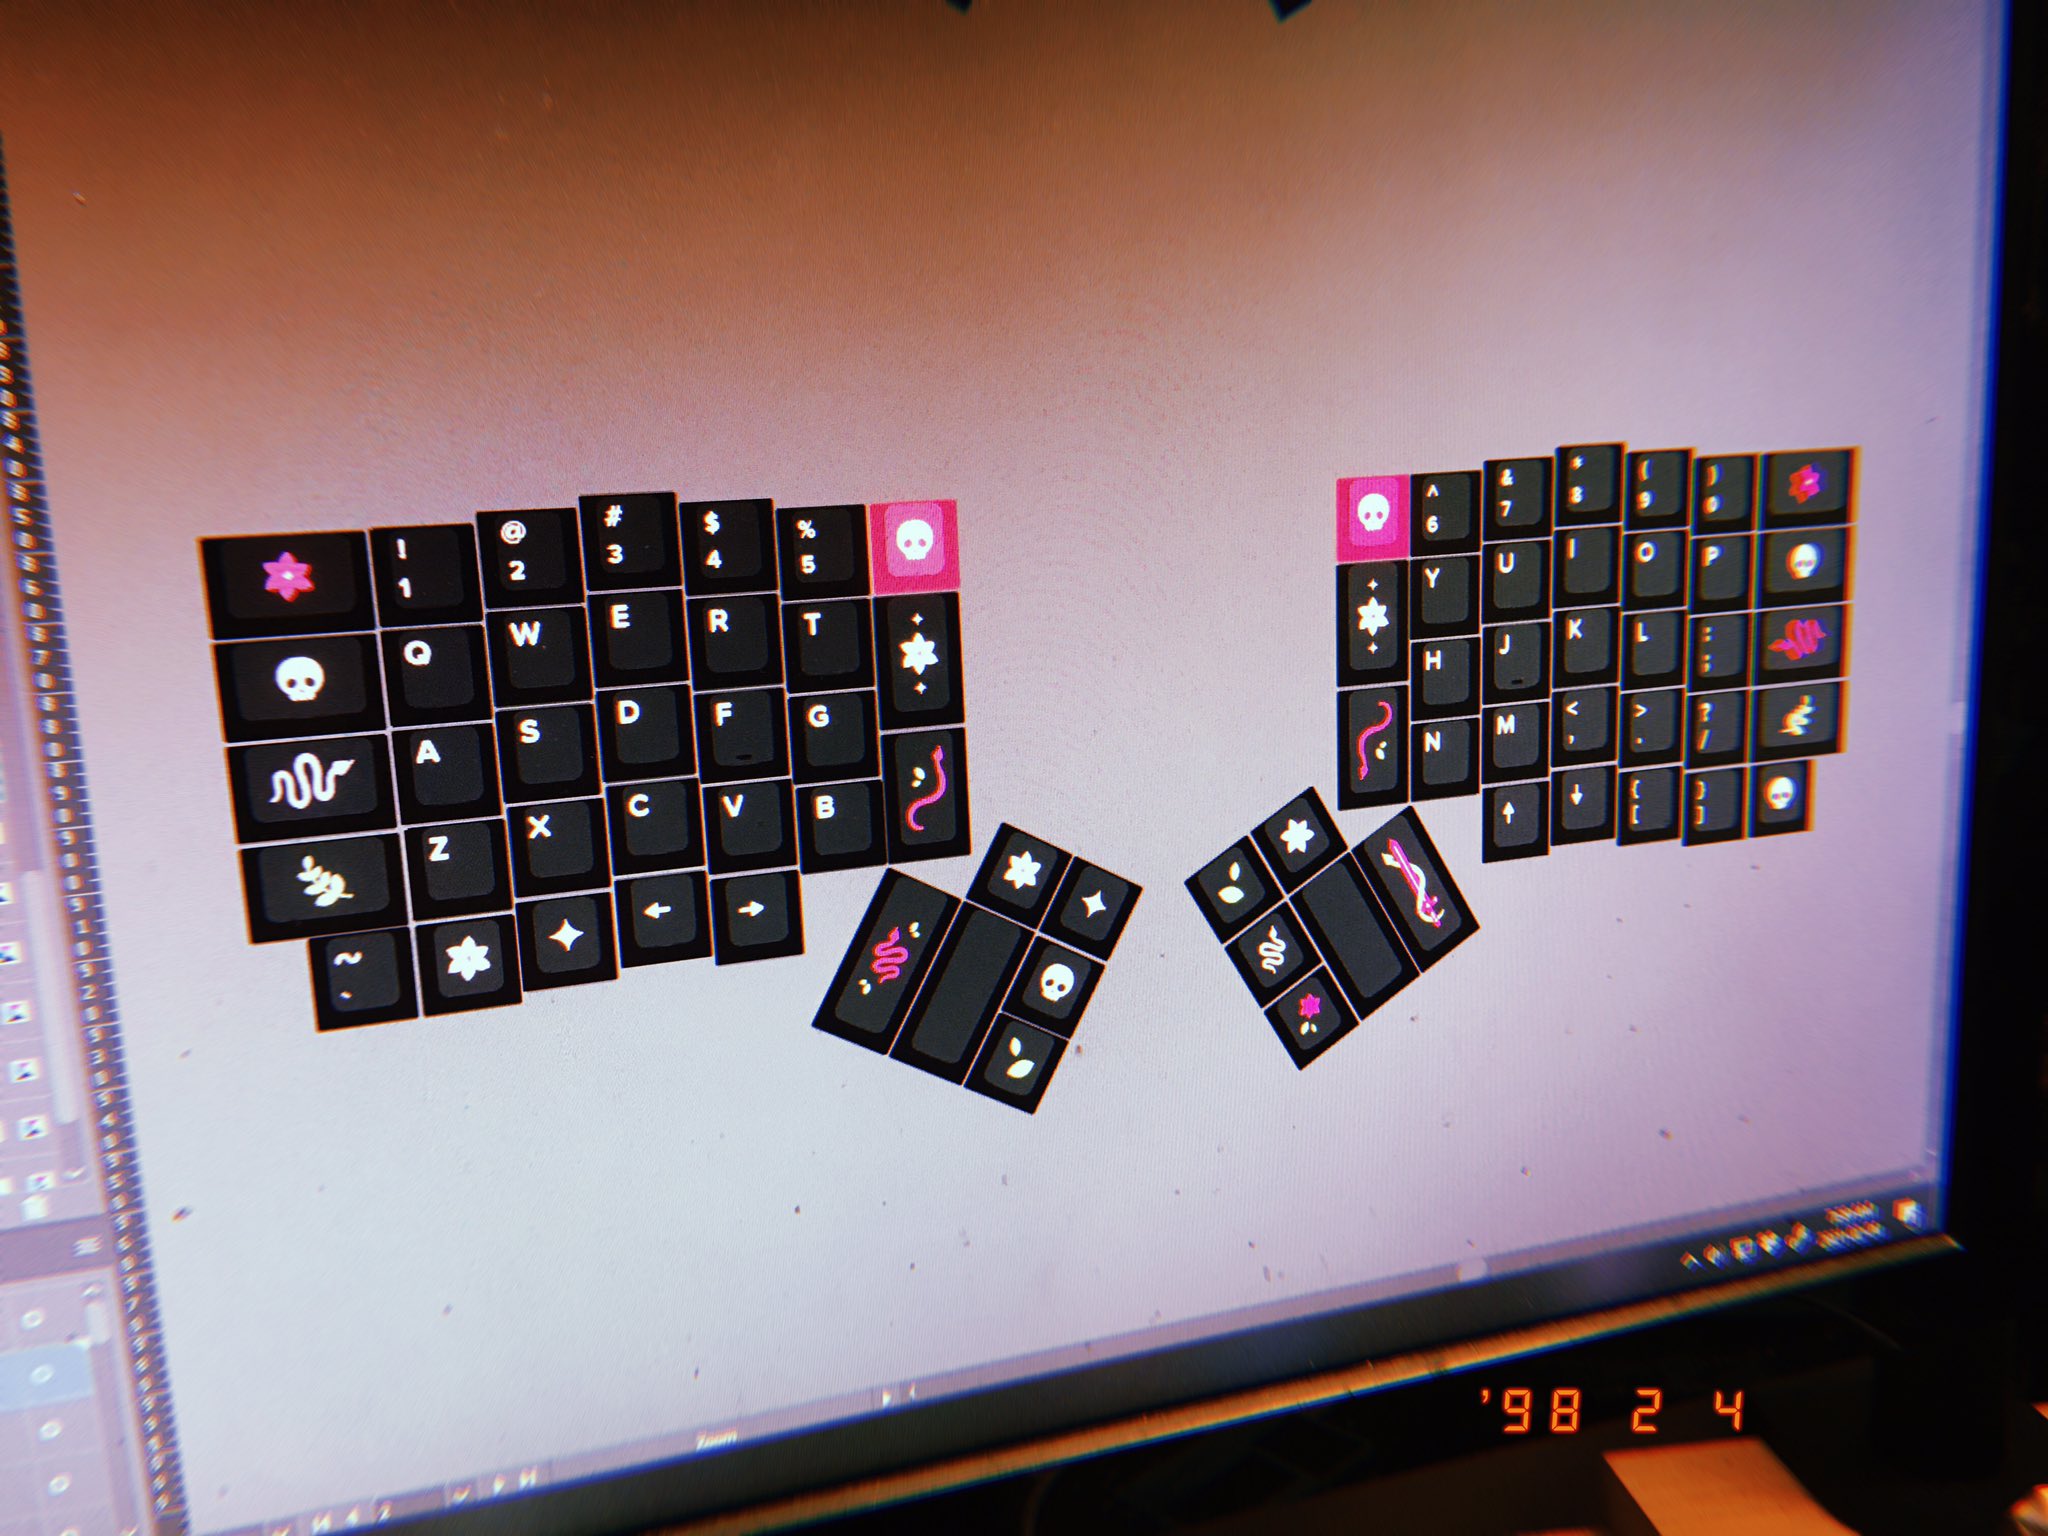 Black keycaps with floral and skull icons, arranged in an ergonomic layout.